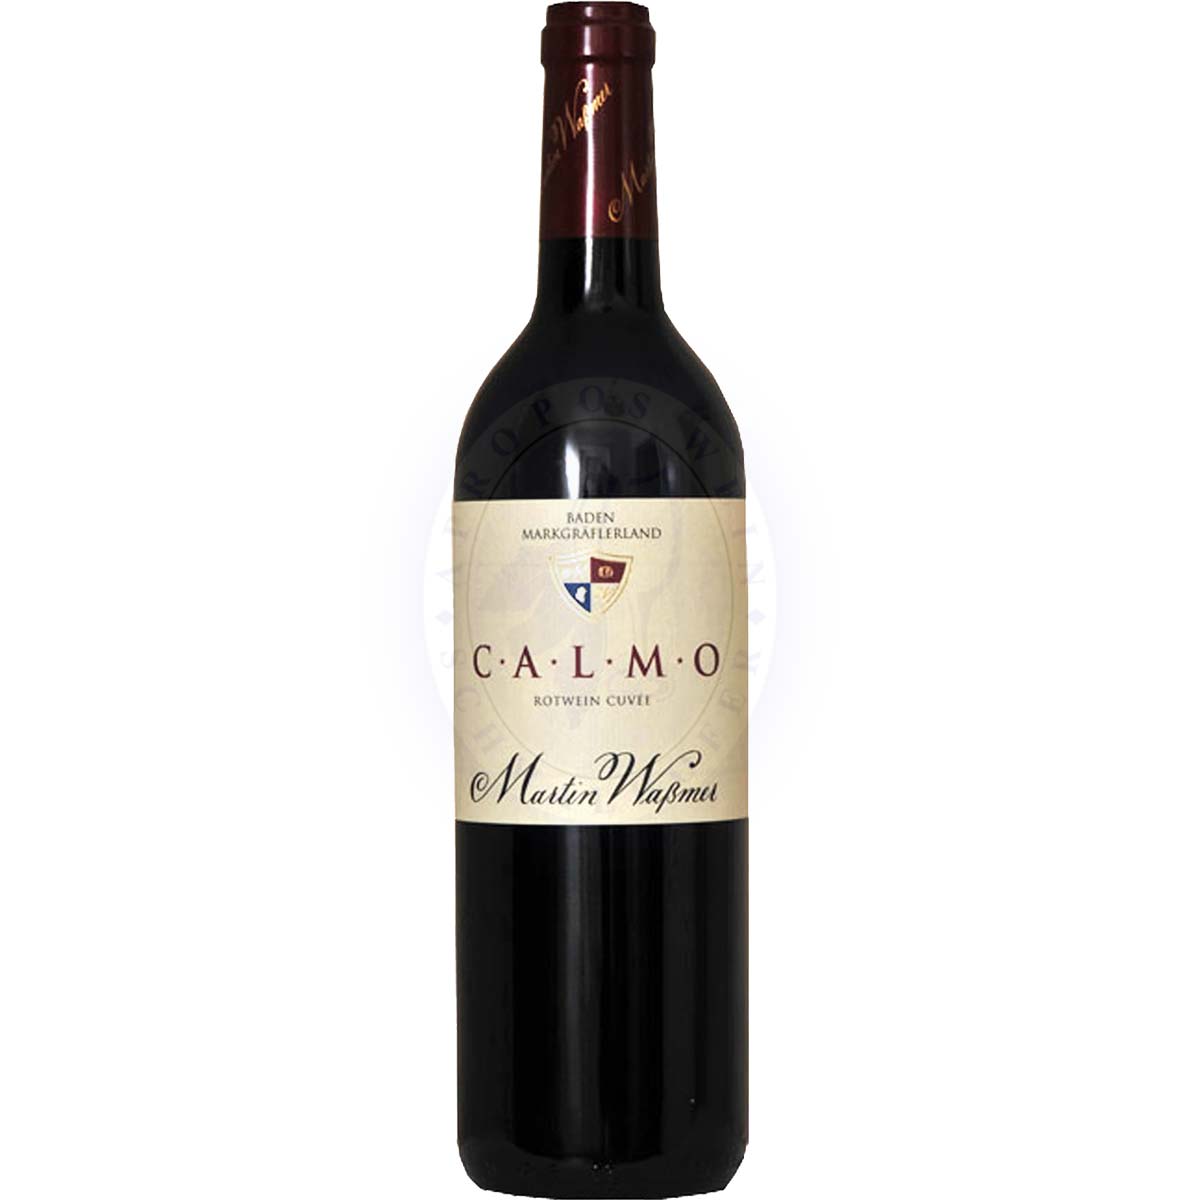 Find+Buy: members wines our The | Find+Buy wein.plus of wein.plus